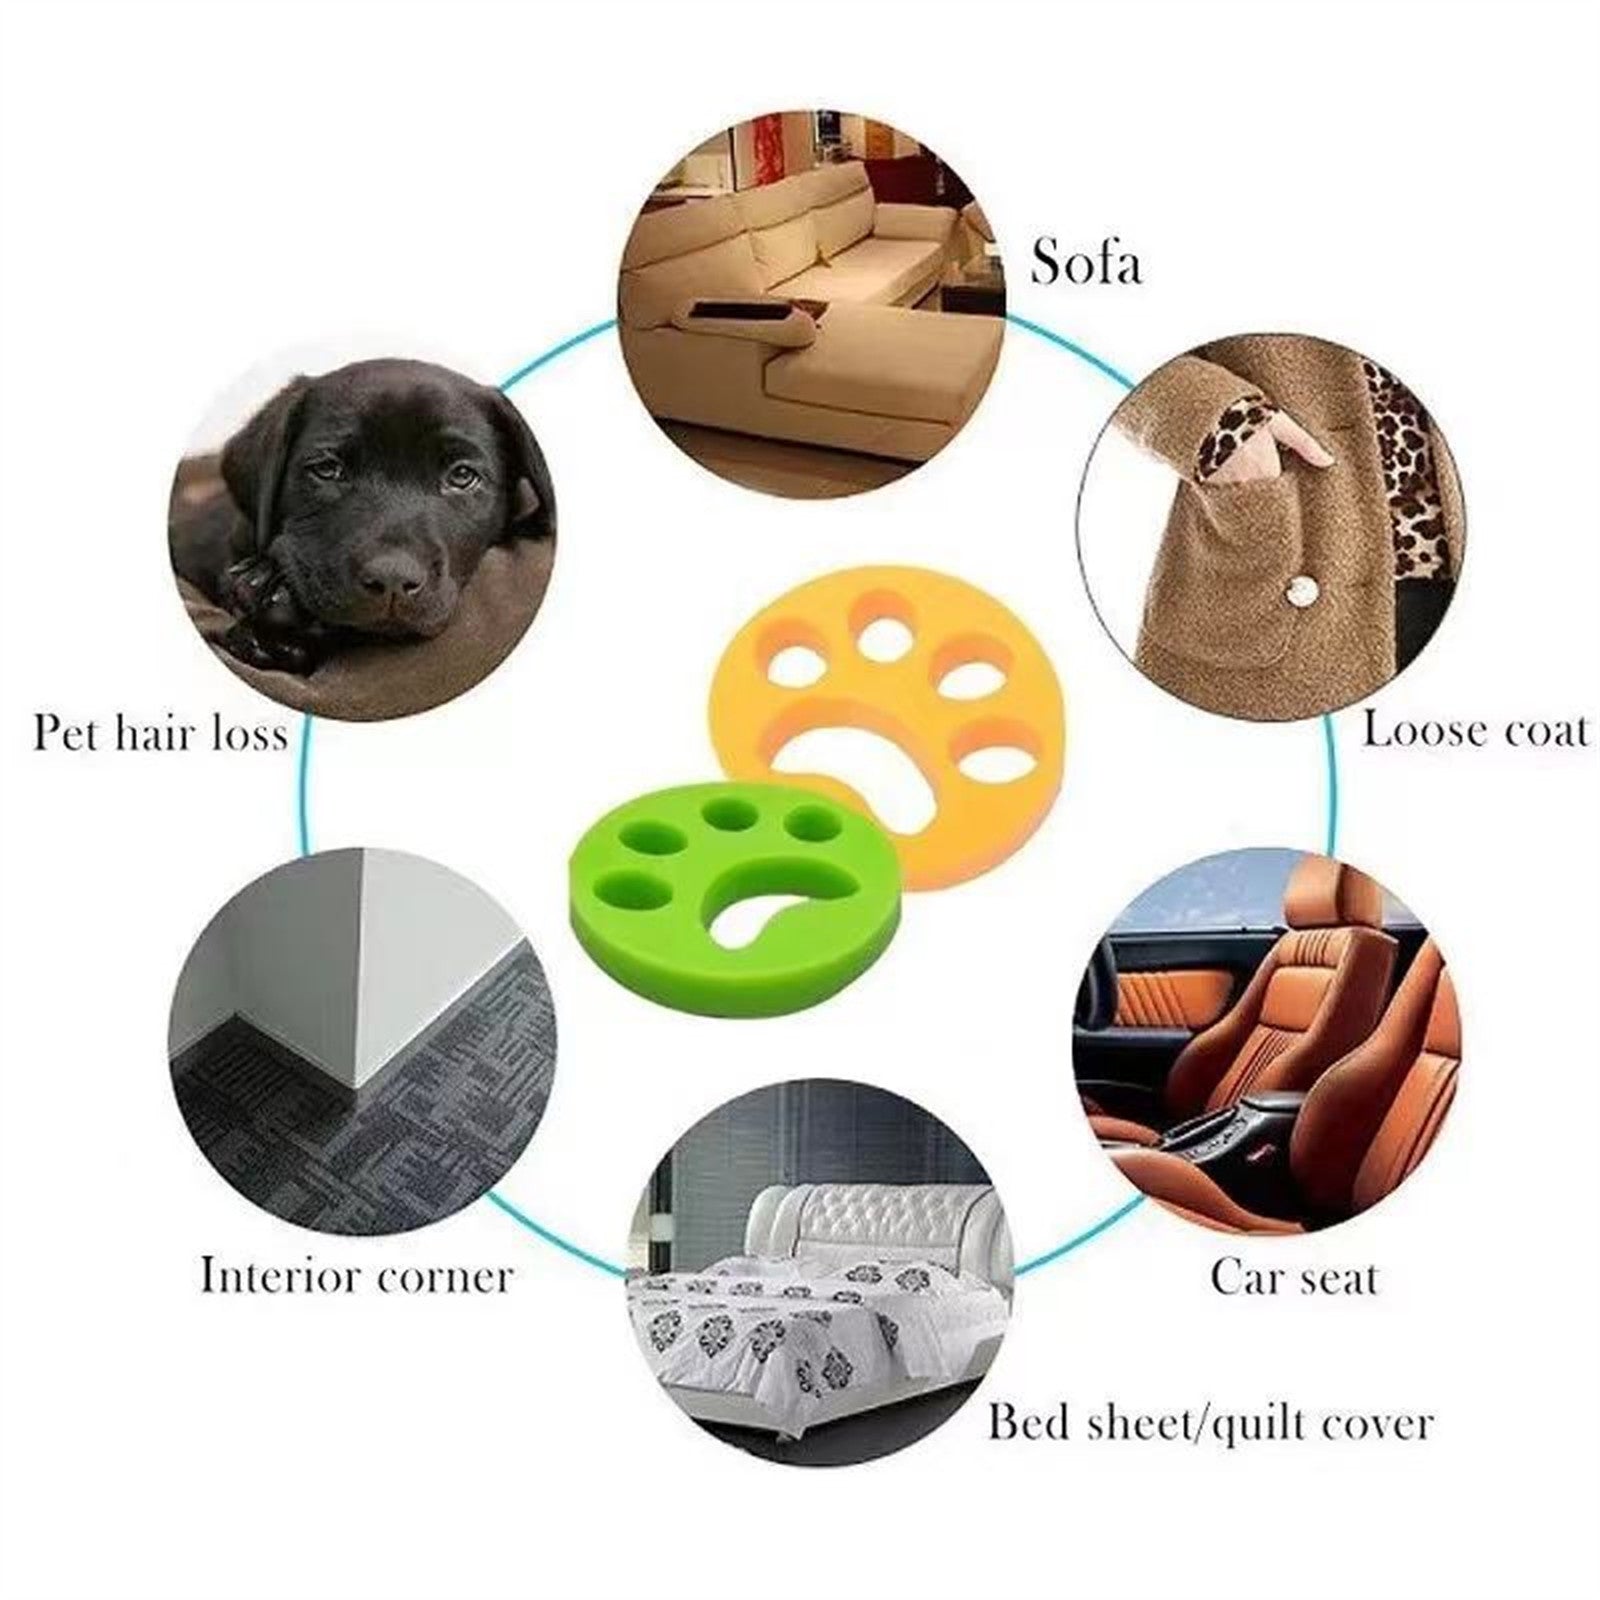 Pawfriends Soft Pet Hair Remover Clothes Cleaning Lint Catcher Solid Laundry Ball Green - SILBERSHELL